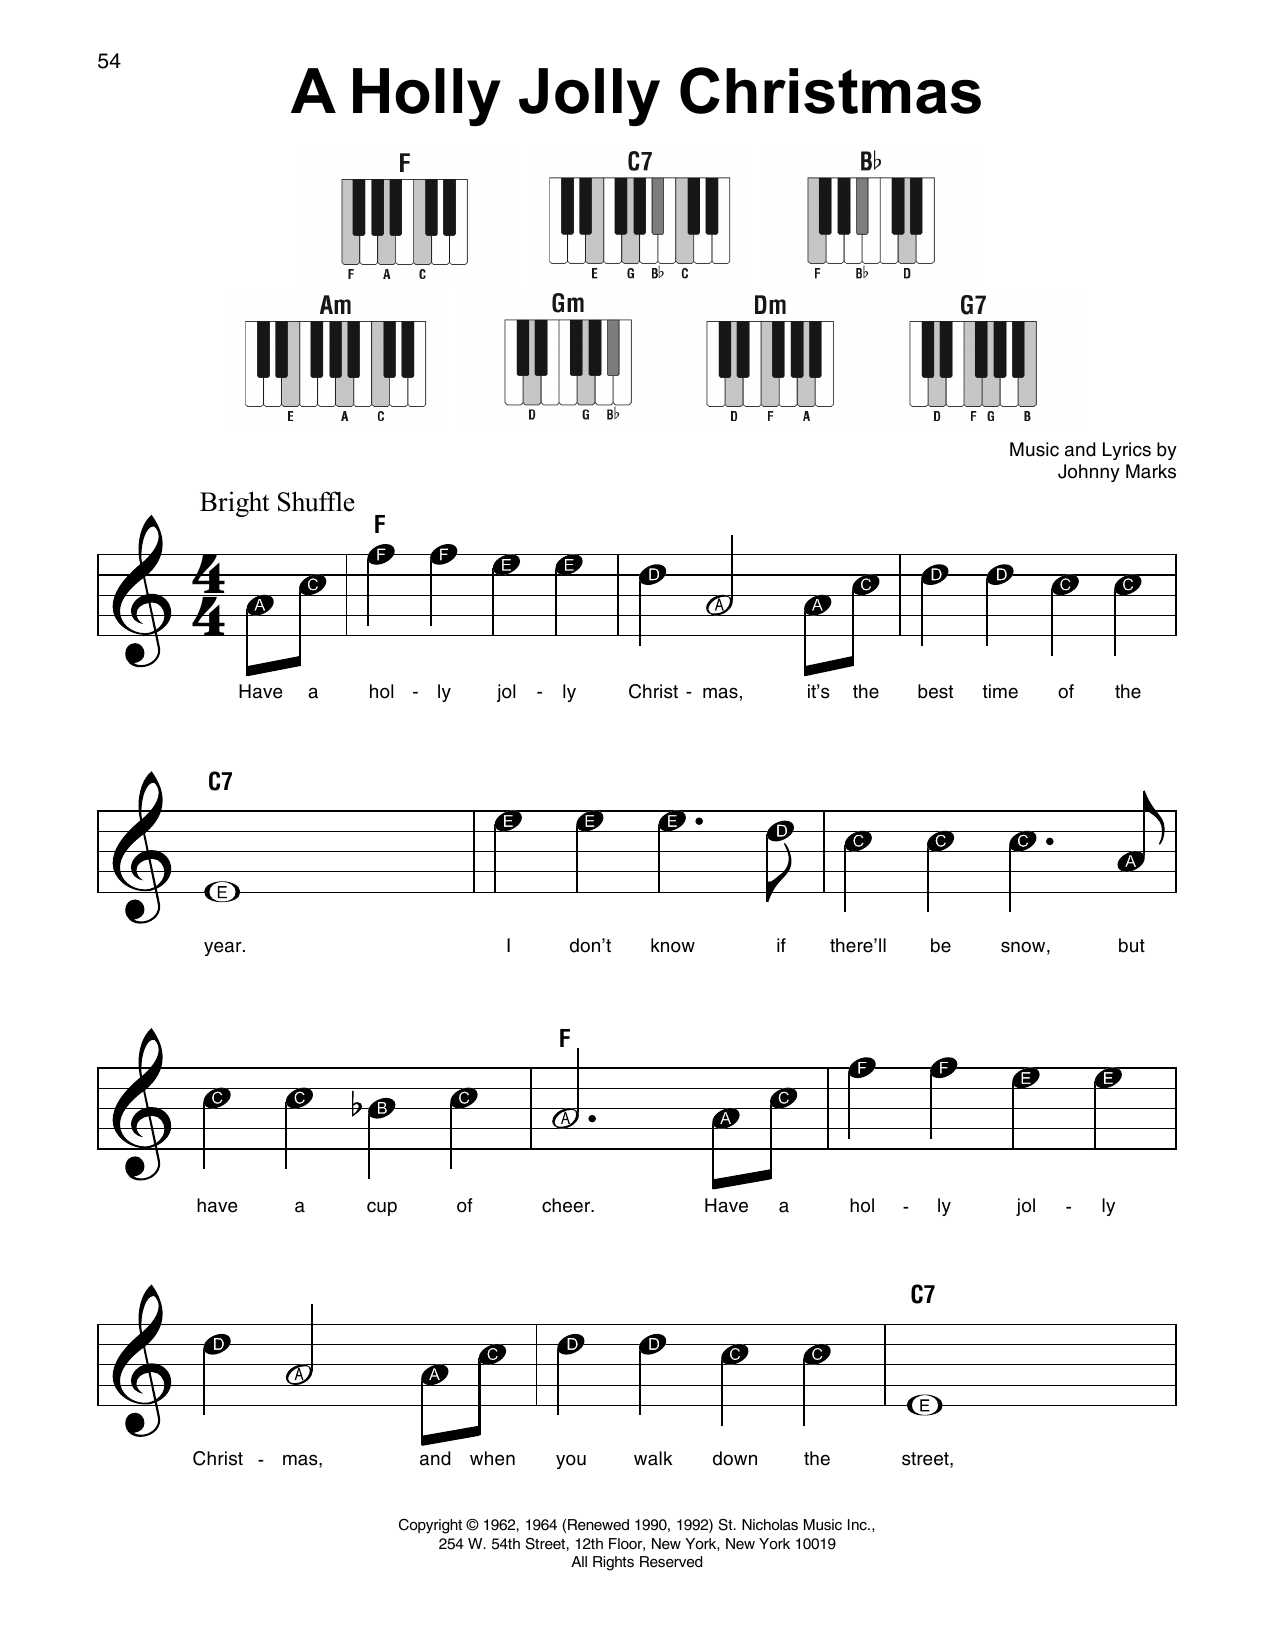 Download Johnny Marks A Holly Jolly Christmas Sheet Music